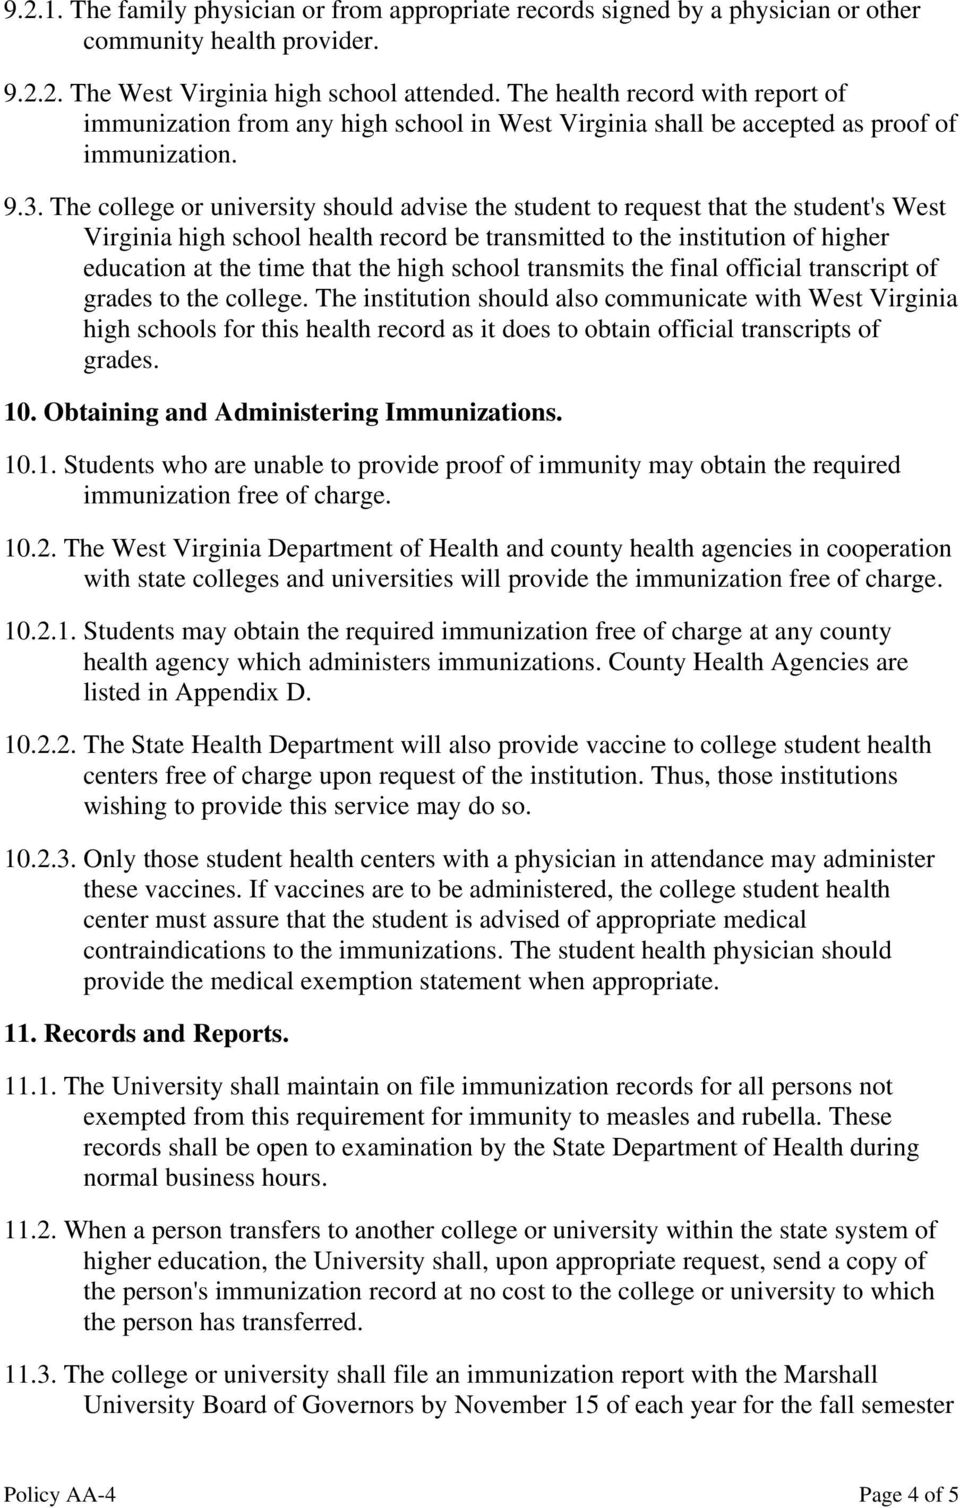 The college or university should advise the student to request that the student's West Virginia high school health record be transmitted to the institution of higher education at the time that the